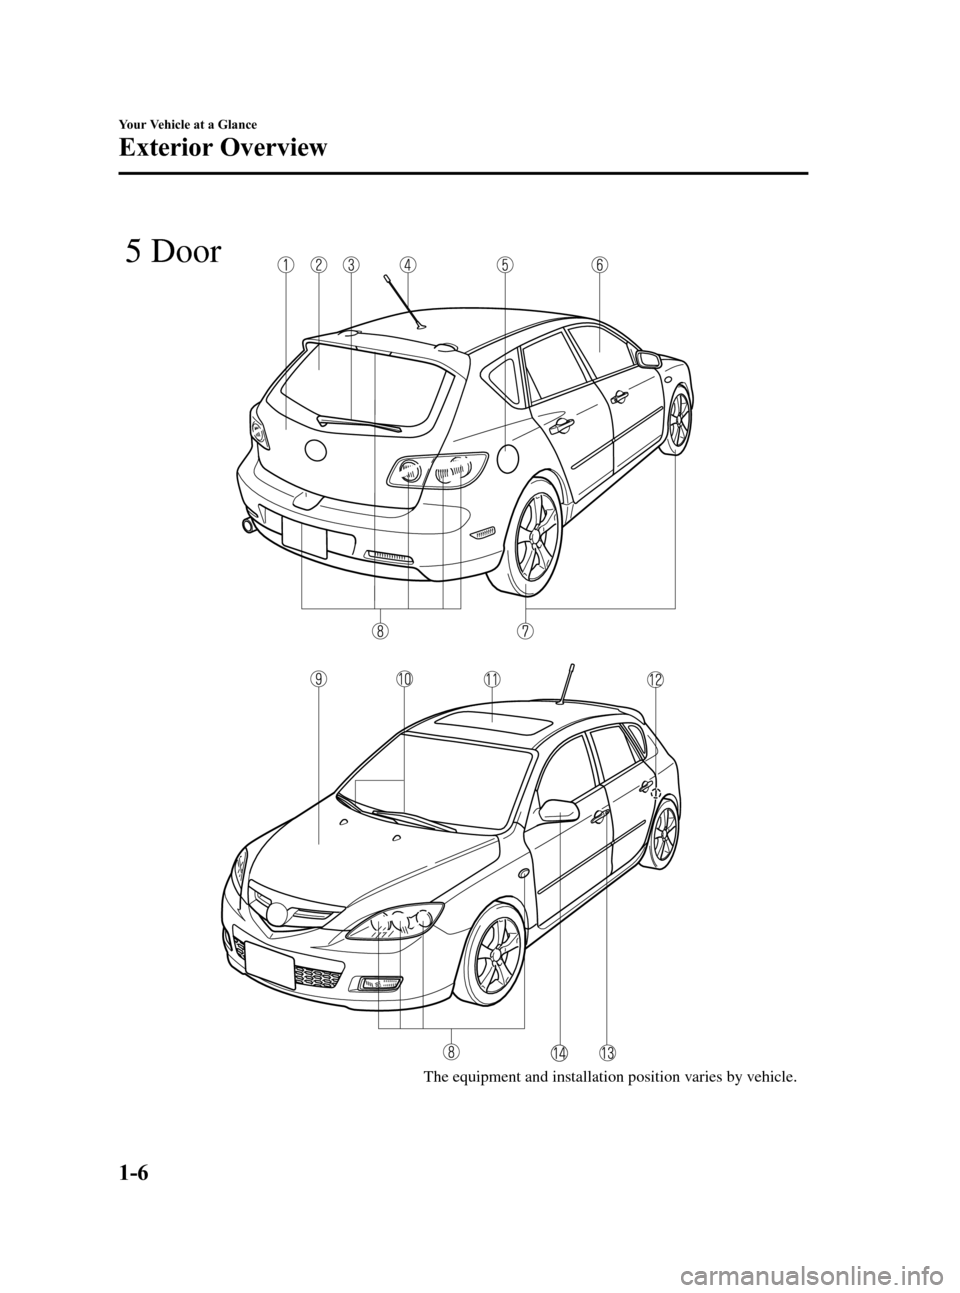 MAZDA MODEL 3 HATCHBACK 2007   (in English) User Guide Black plate (12,1)
The equipment and installation position varies by vehicle.
5 Door
1-6
Your Vehicle at a Glance
Exterior Overview
Mazda3_8V66-EA-06F_Edition3 Page12
Wednesday, August 23 2006 11:18 A